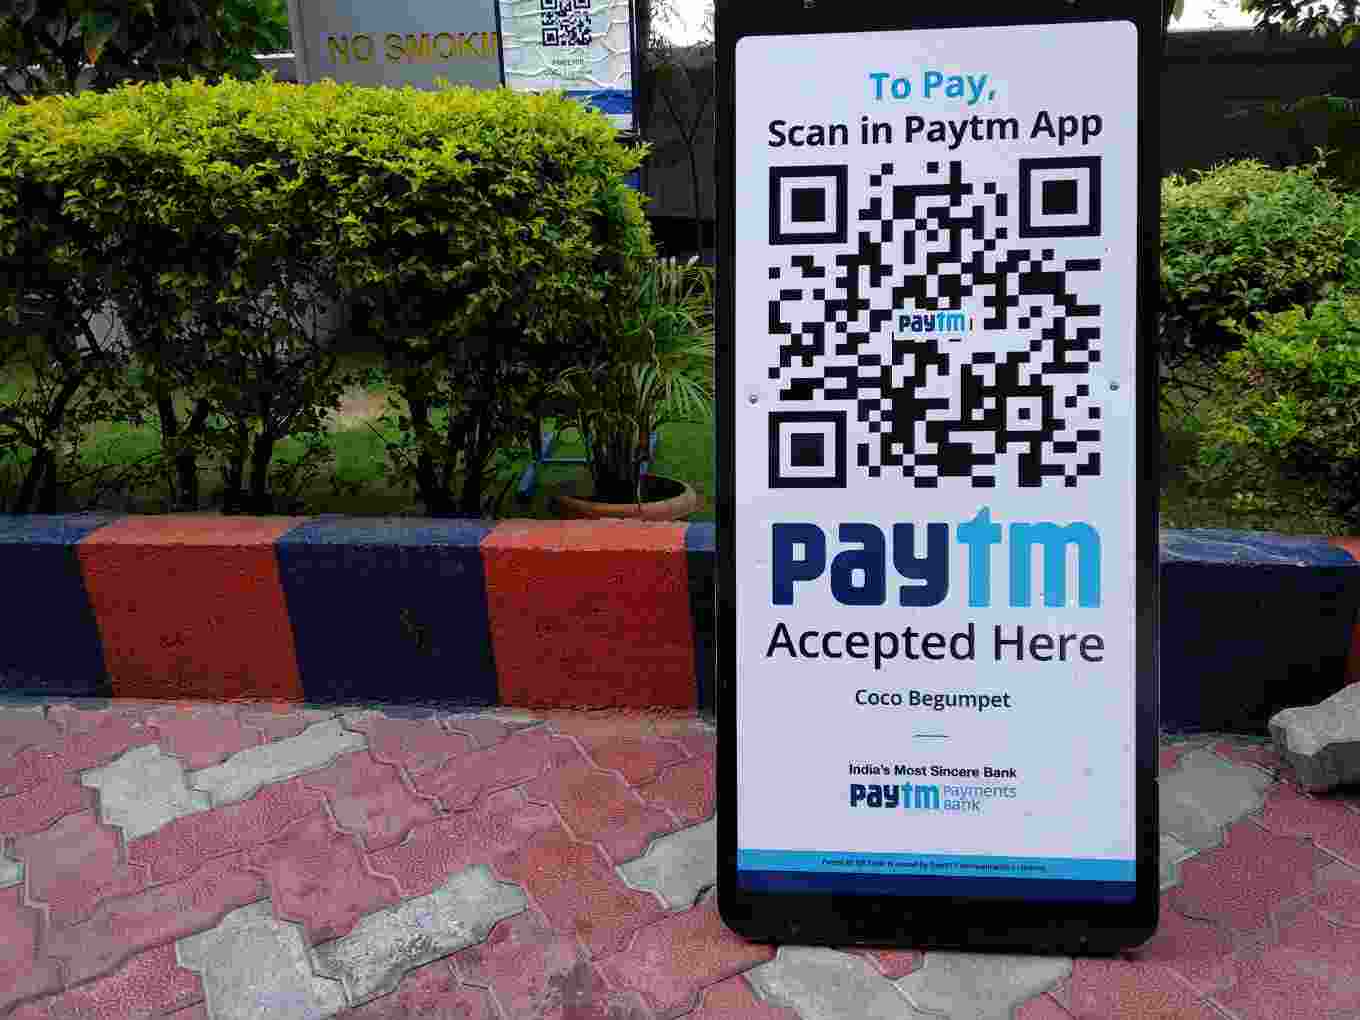 Paytm, the poster boy of India's fintech revolution founded in 2010 by Vijay Shekhar Sharma, has found itself embroiled in a crisis as the Reserve Bank of India (RBI) imposed significant restrictions on its operations.